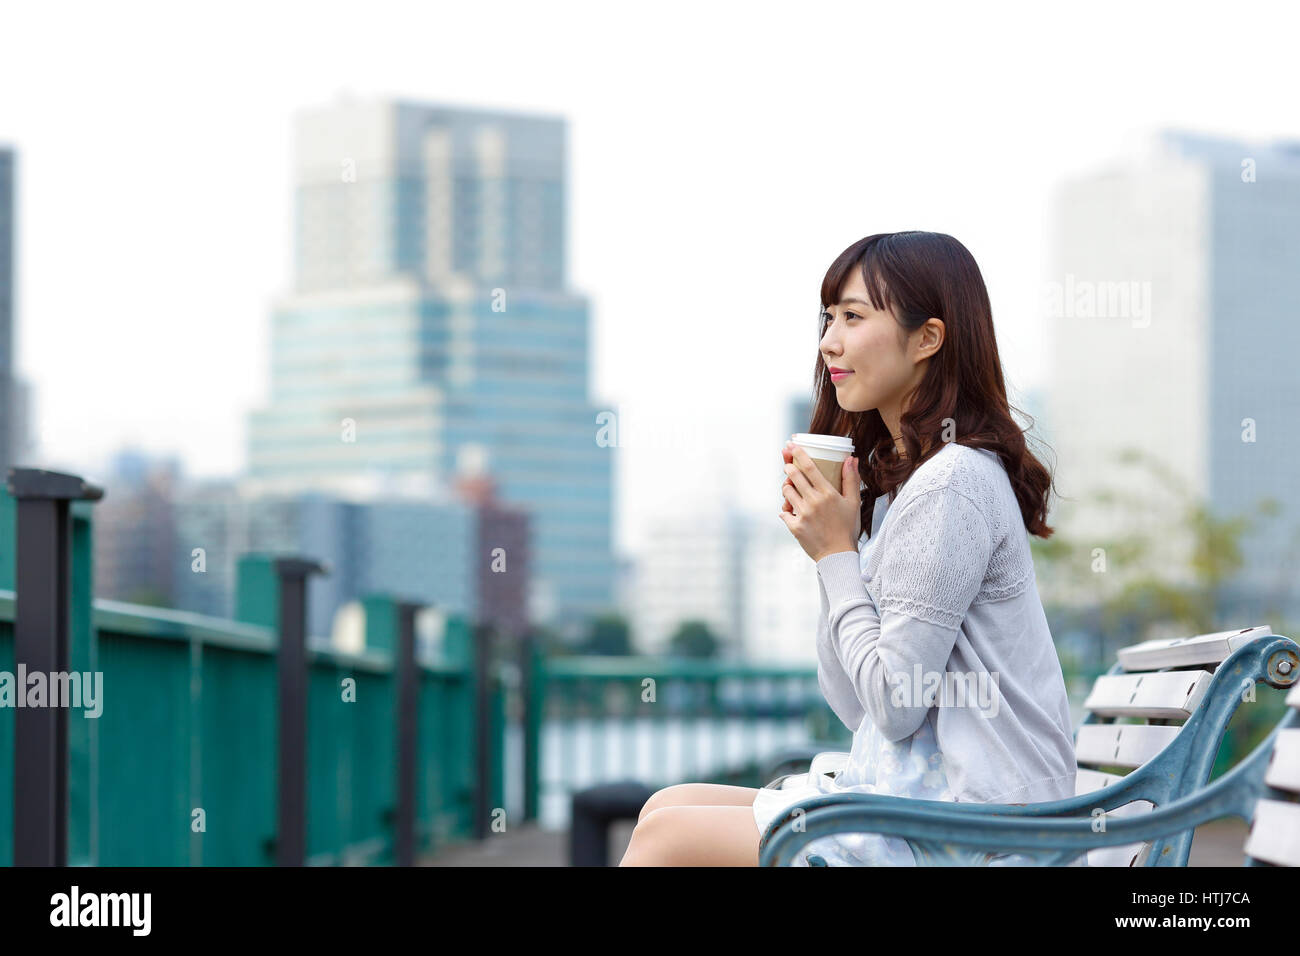 Fashionable Japanese woman with coffee sitting on a bench by the river, Tokyo, Japan Stock Photo